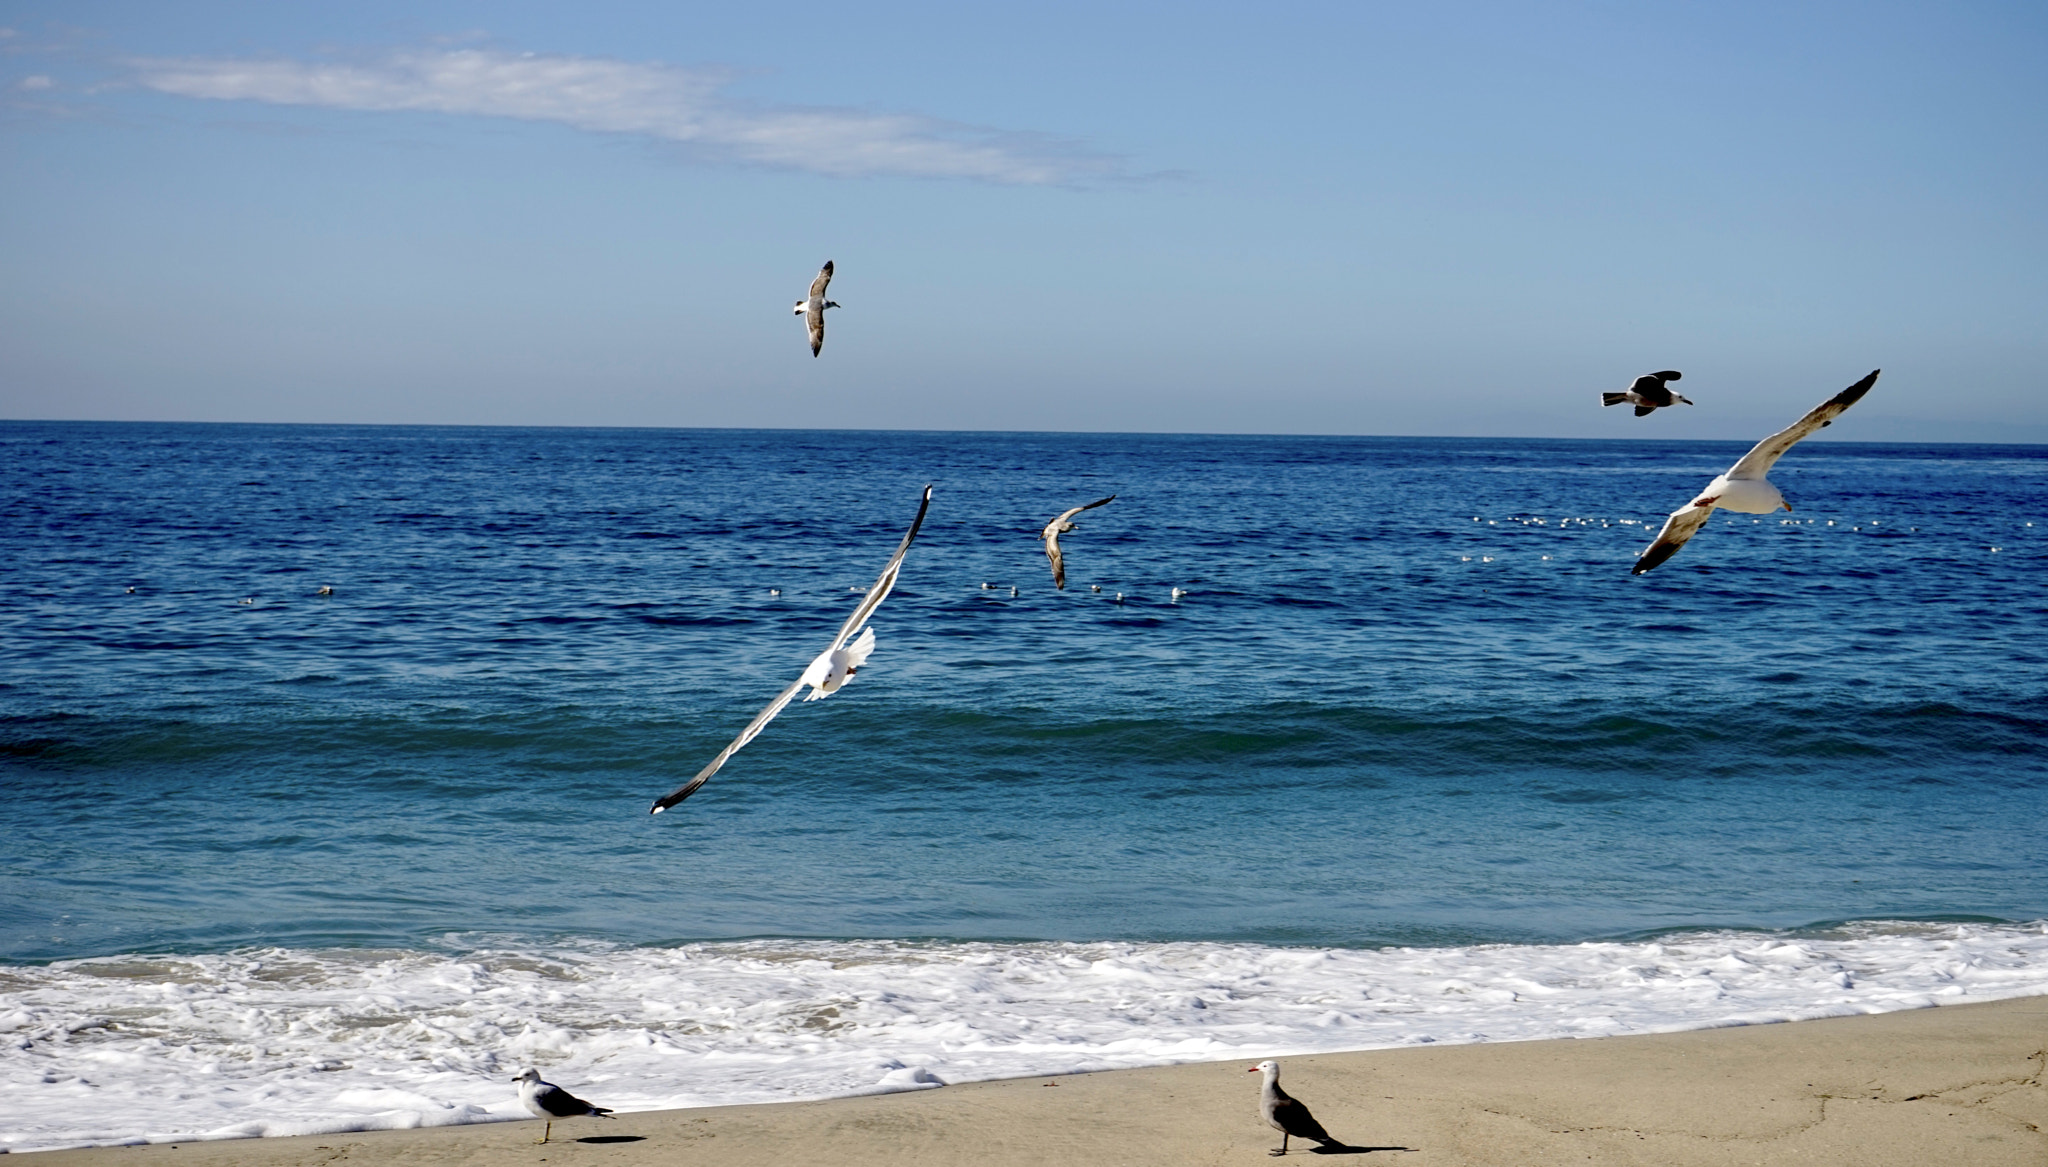 Sony a7 sample photo. Seagulls,flying and landing just to fly again and land again...truly a spectators sport photography